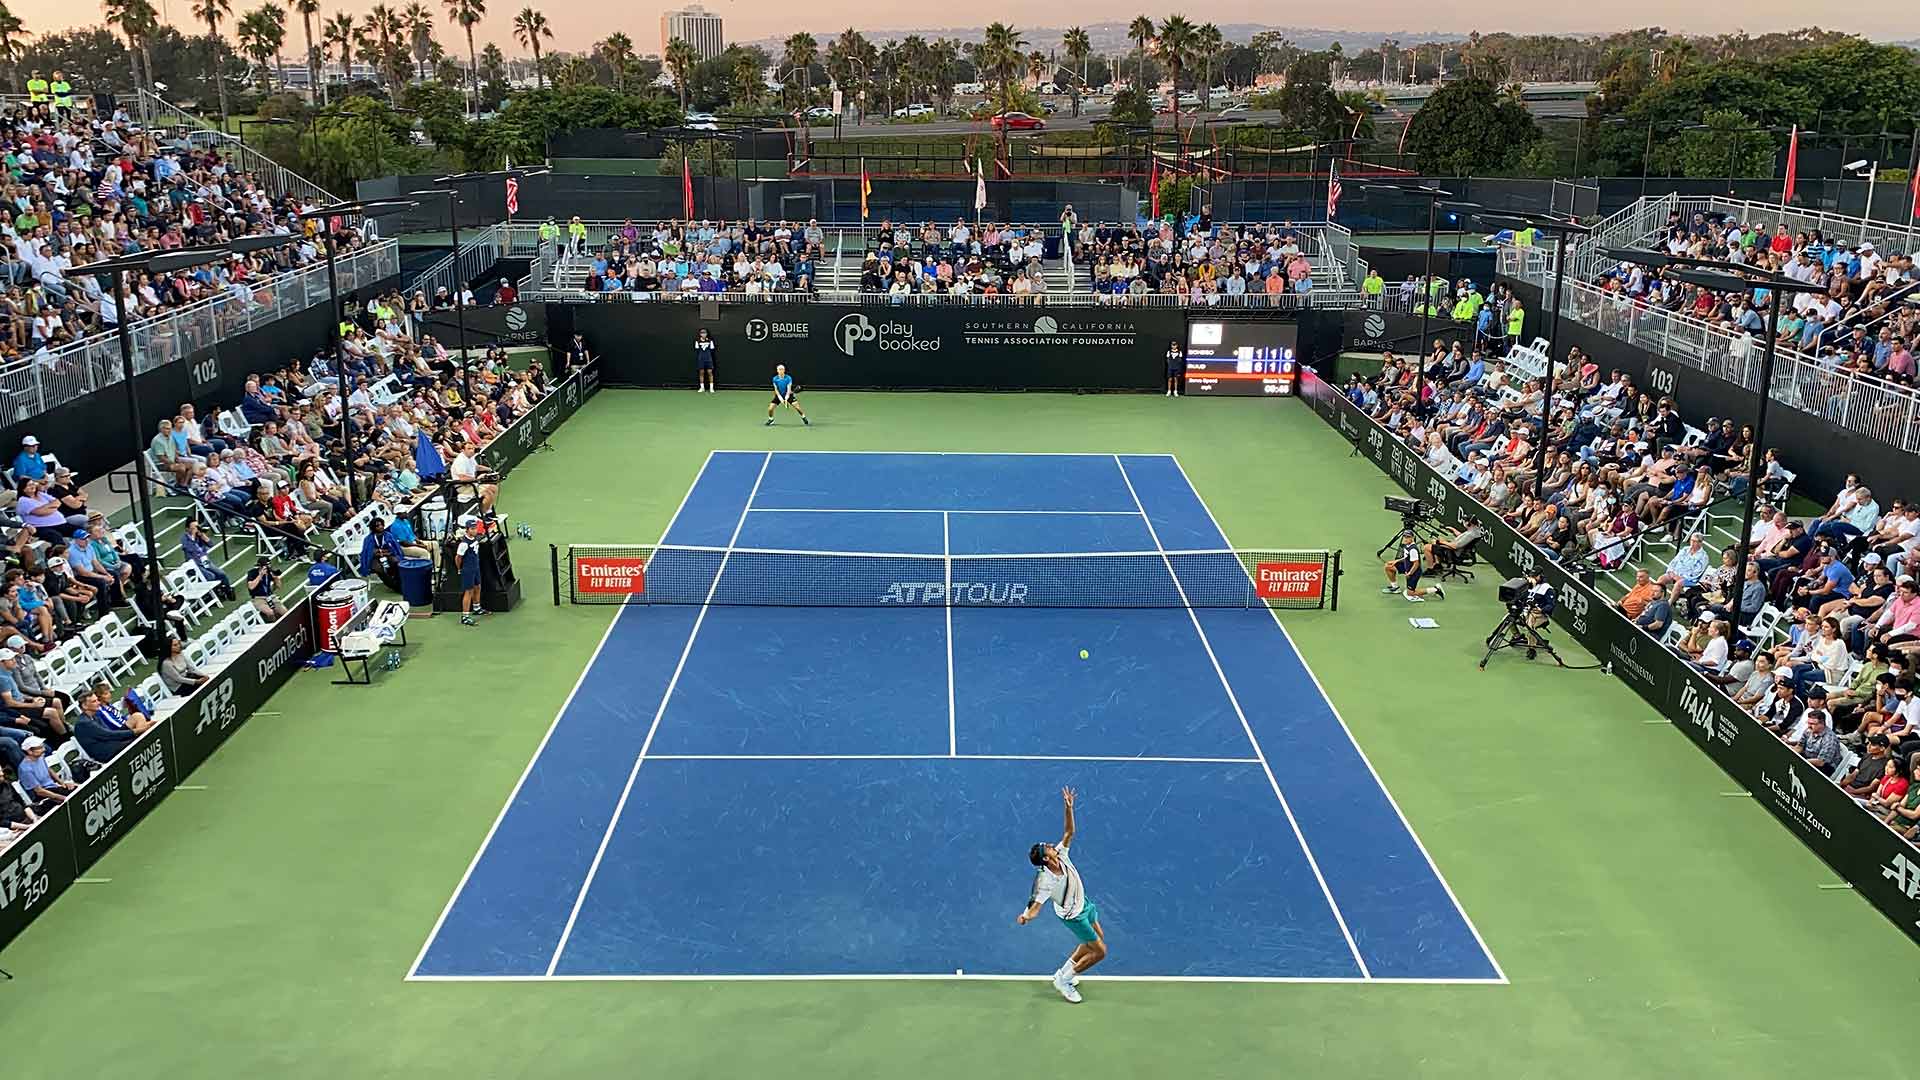 San Diego Open LIVE Schedule, Draw, All you need to know about San Diego Open 2022